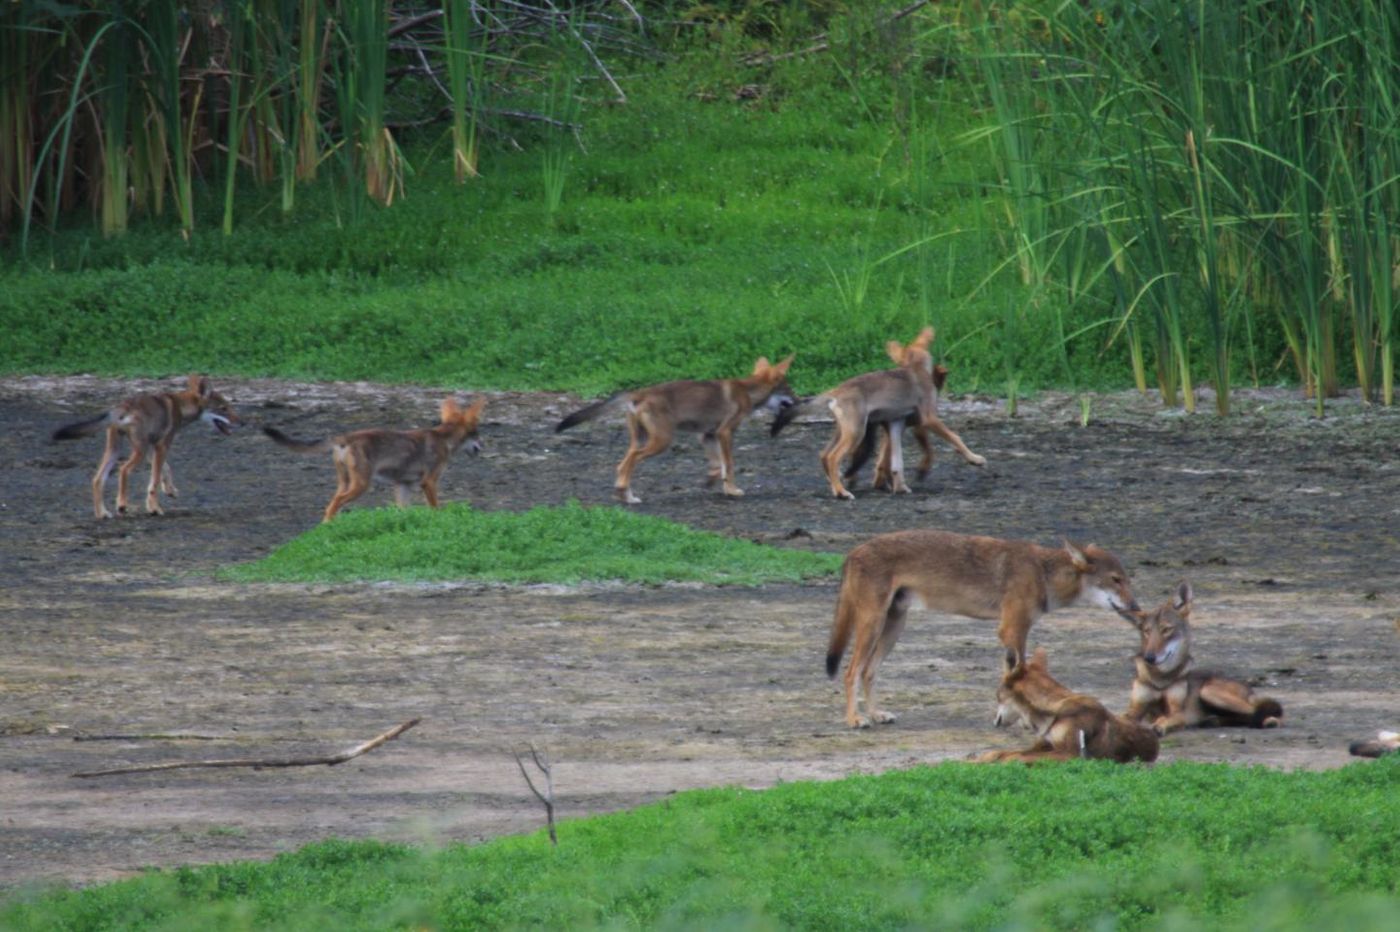 Wildlife biologist Ron Wooten spotted this pack of canines on Galveston Island, Texas, in a region where red wolves were declared regionally extinct more than 35 years ago. / Credit: Courtesy of Ron Wooten